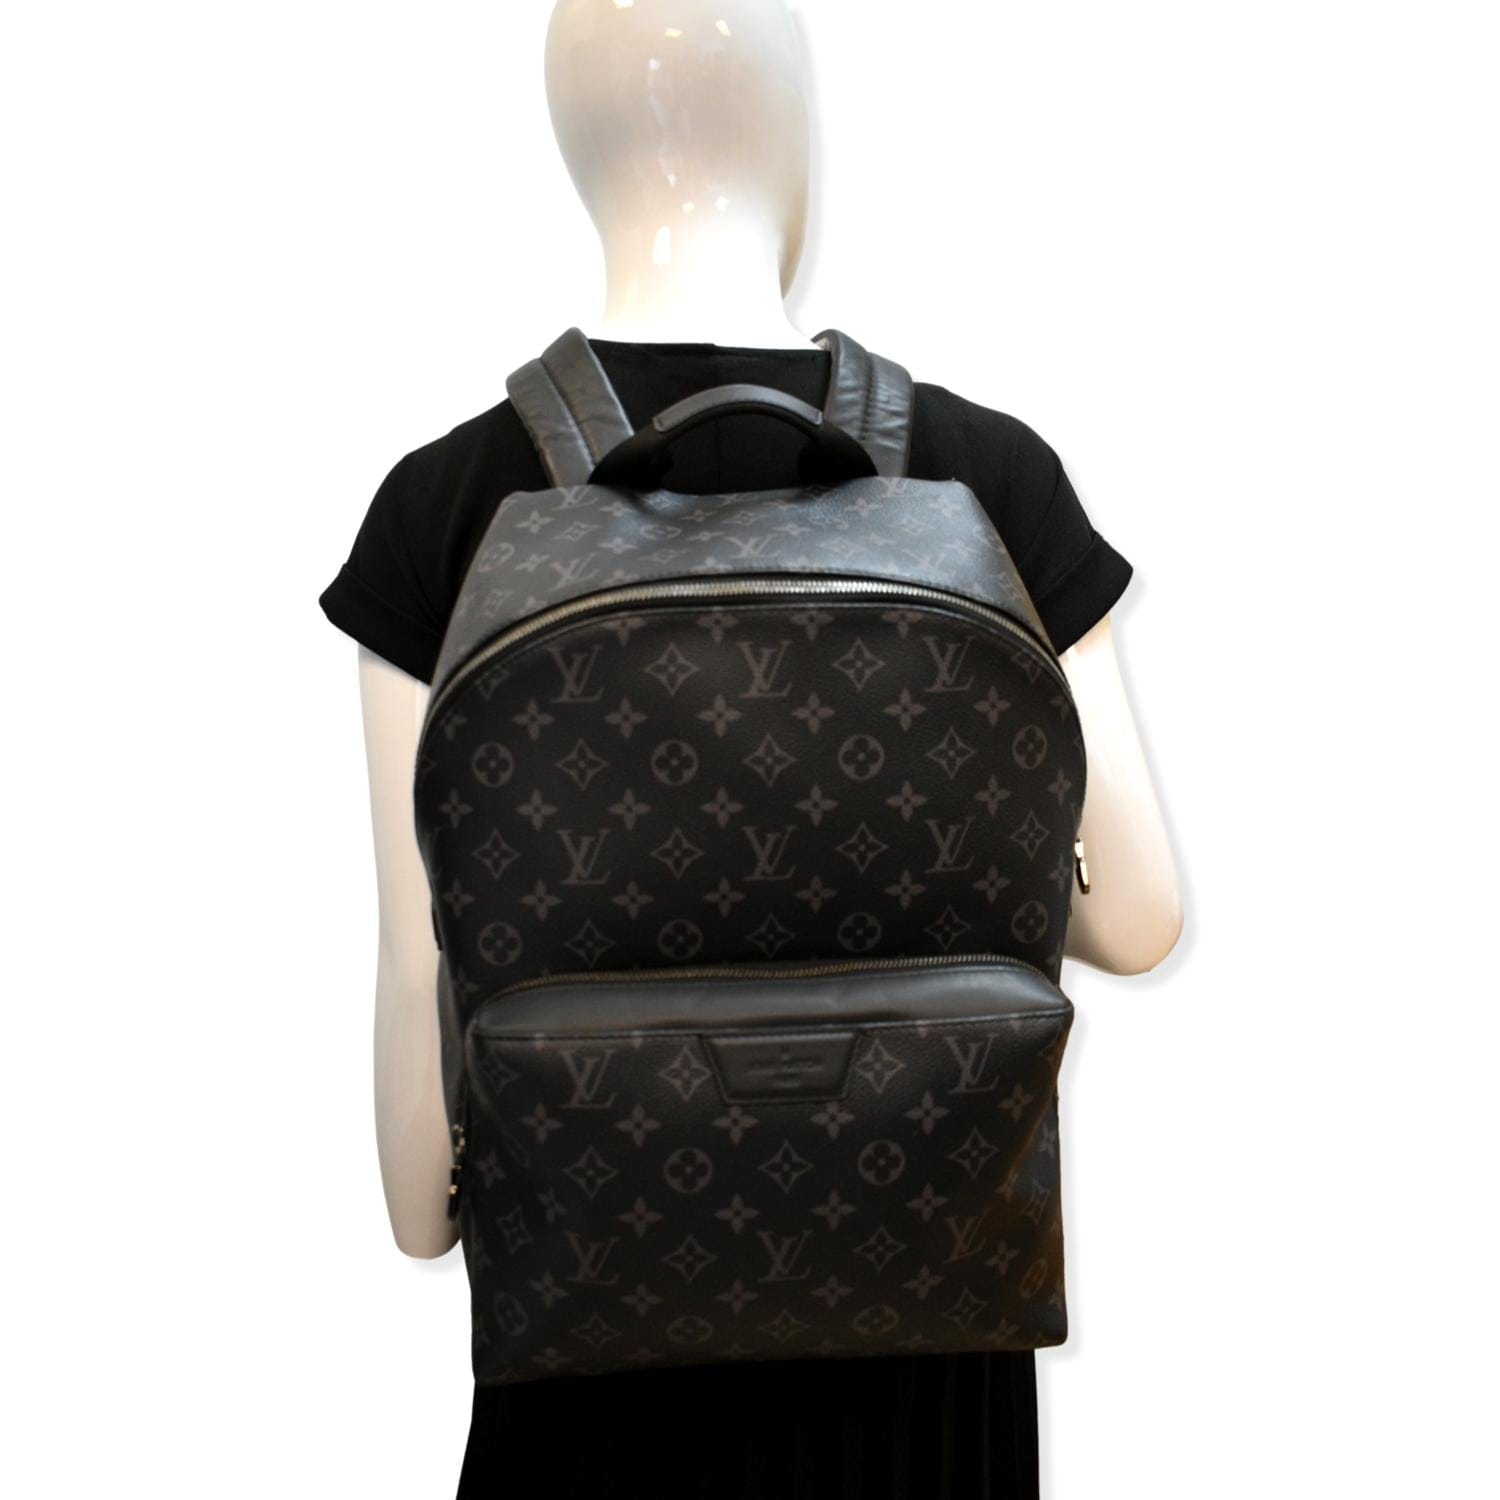 Louis Vuitton Monogram Eclipse Discovery Backpack - Black Backpacks, Bags -  LOU739134